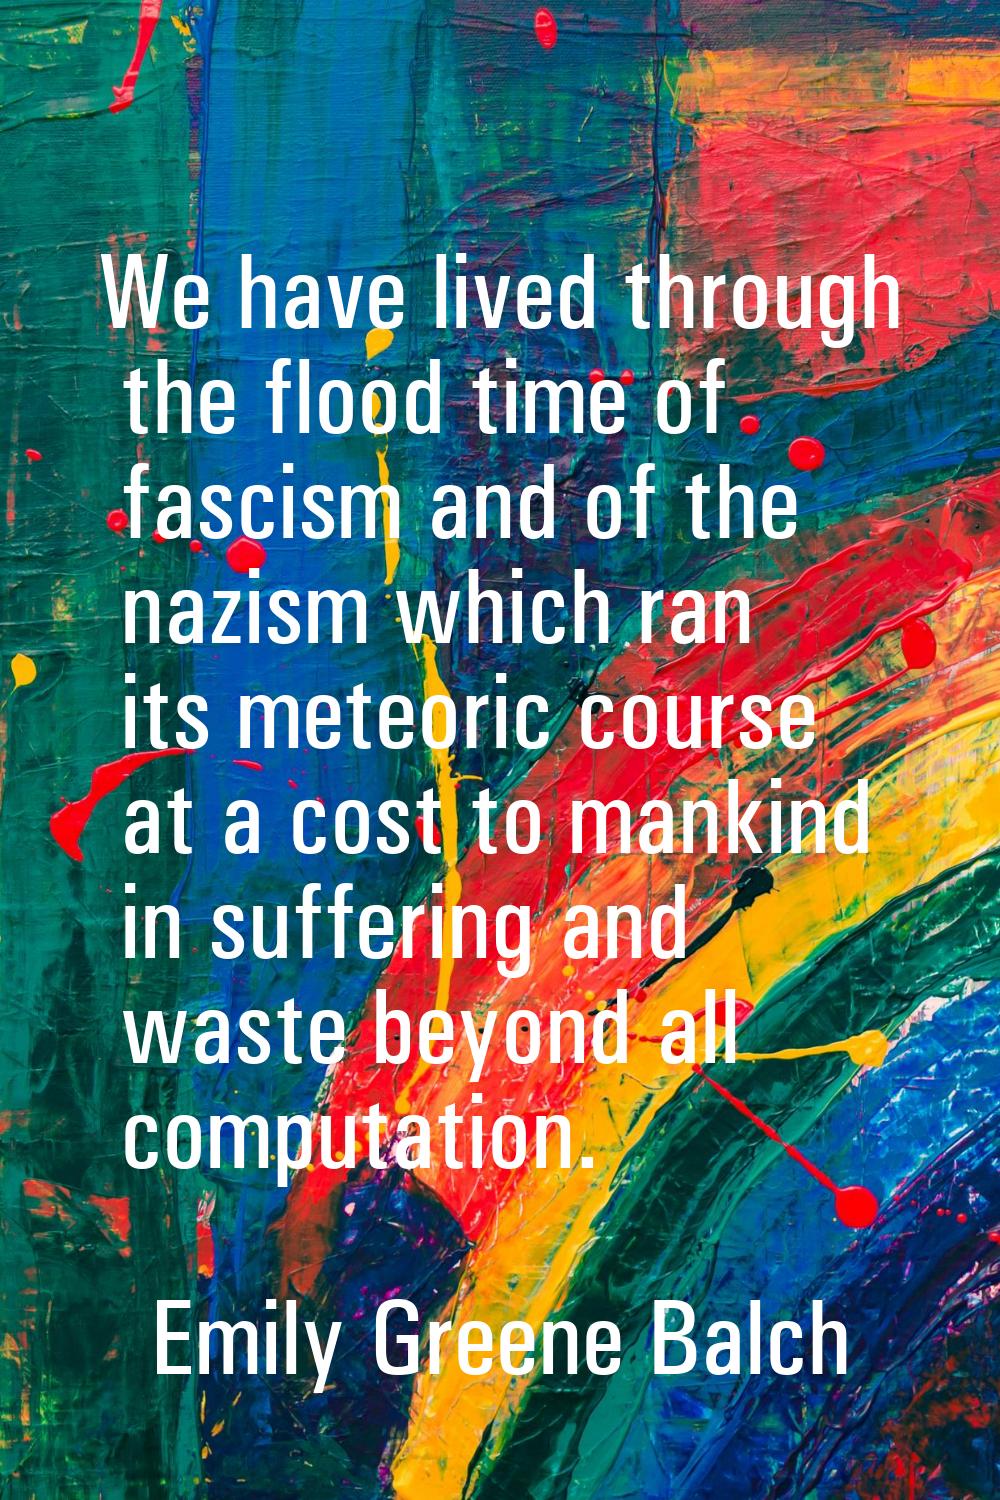 We have lived through the flood time of fascism and of the nazism which ran its meteoric course at 